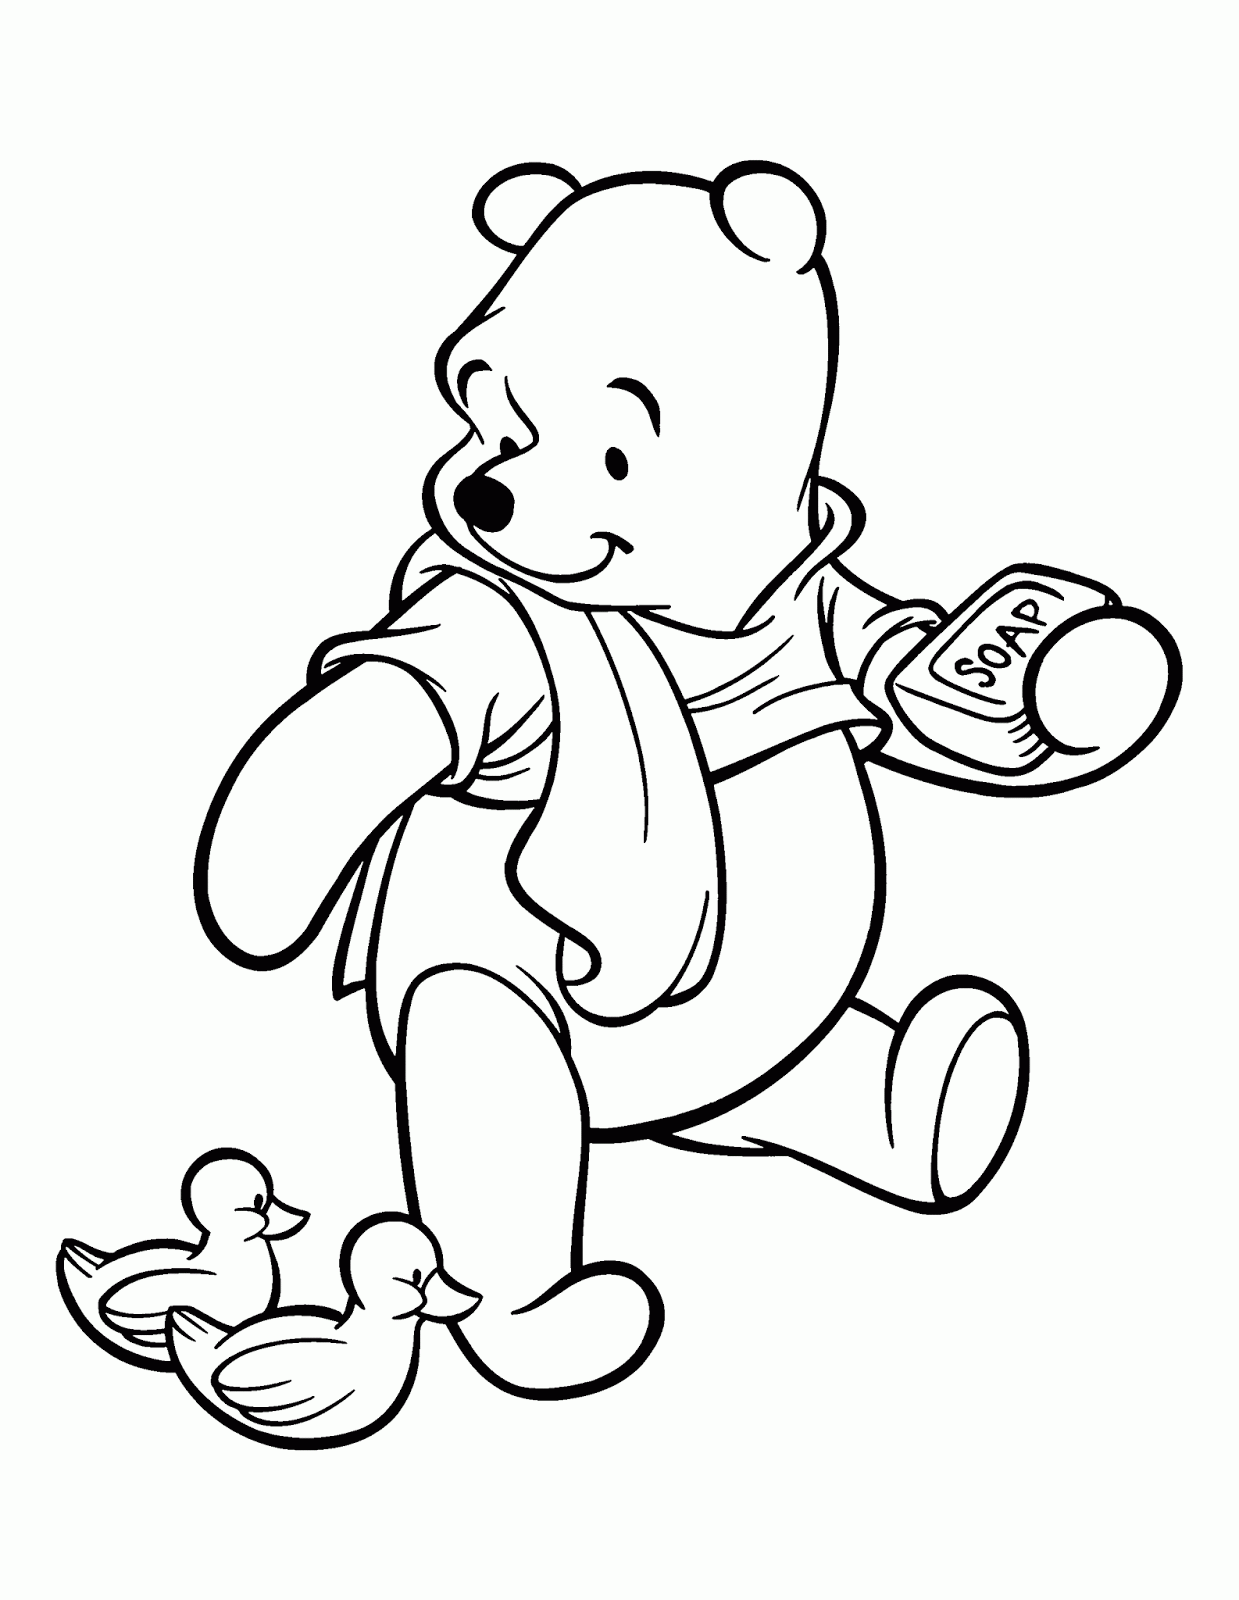 free winnie the pooh coloring sheets free printable winnie the pooh coloring pages for kids sheets pooh free the winnie coloring 